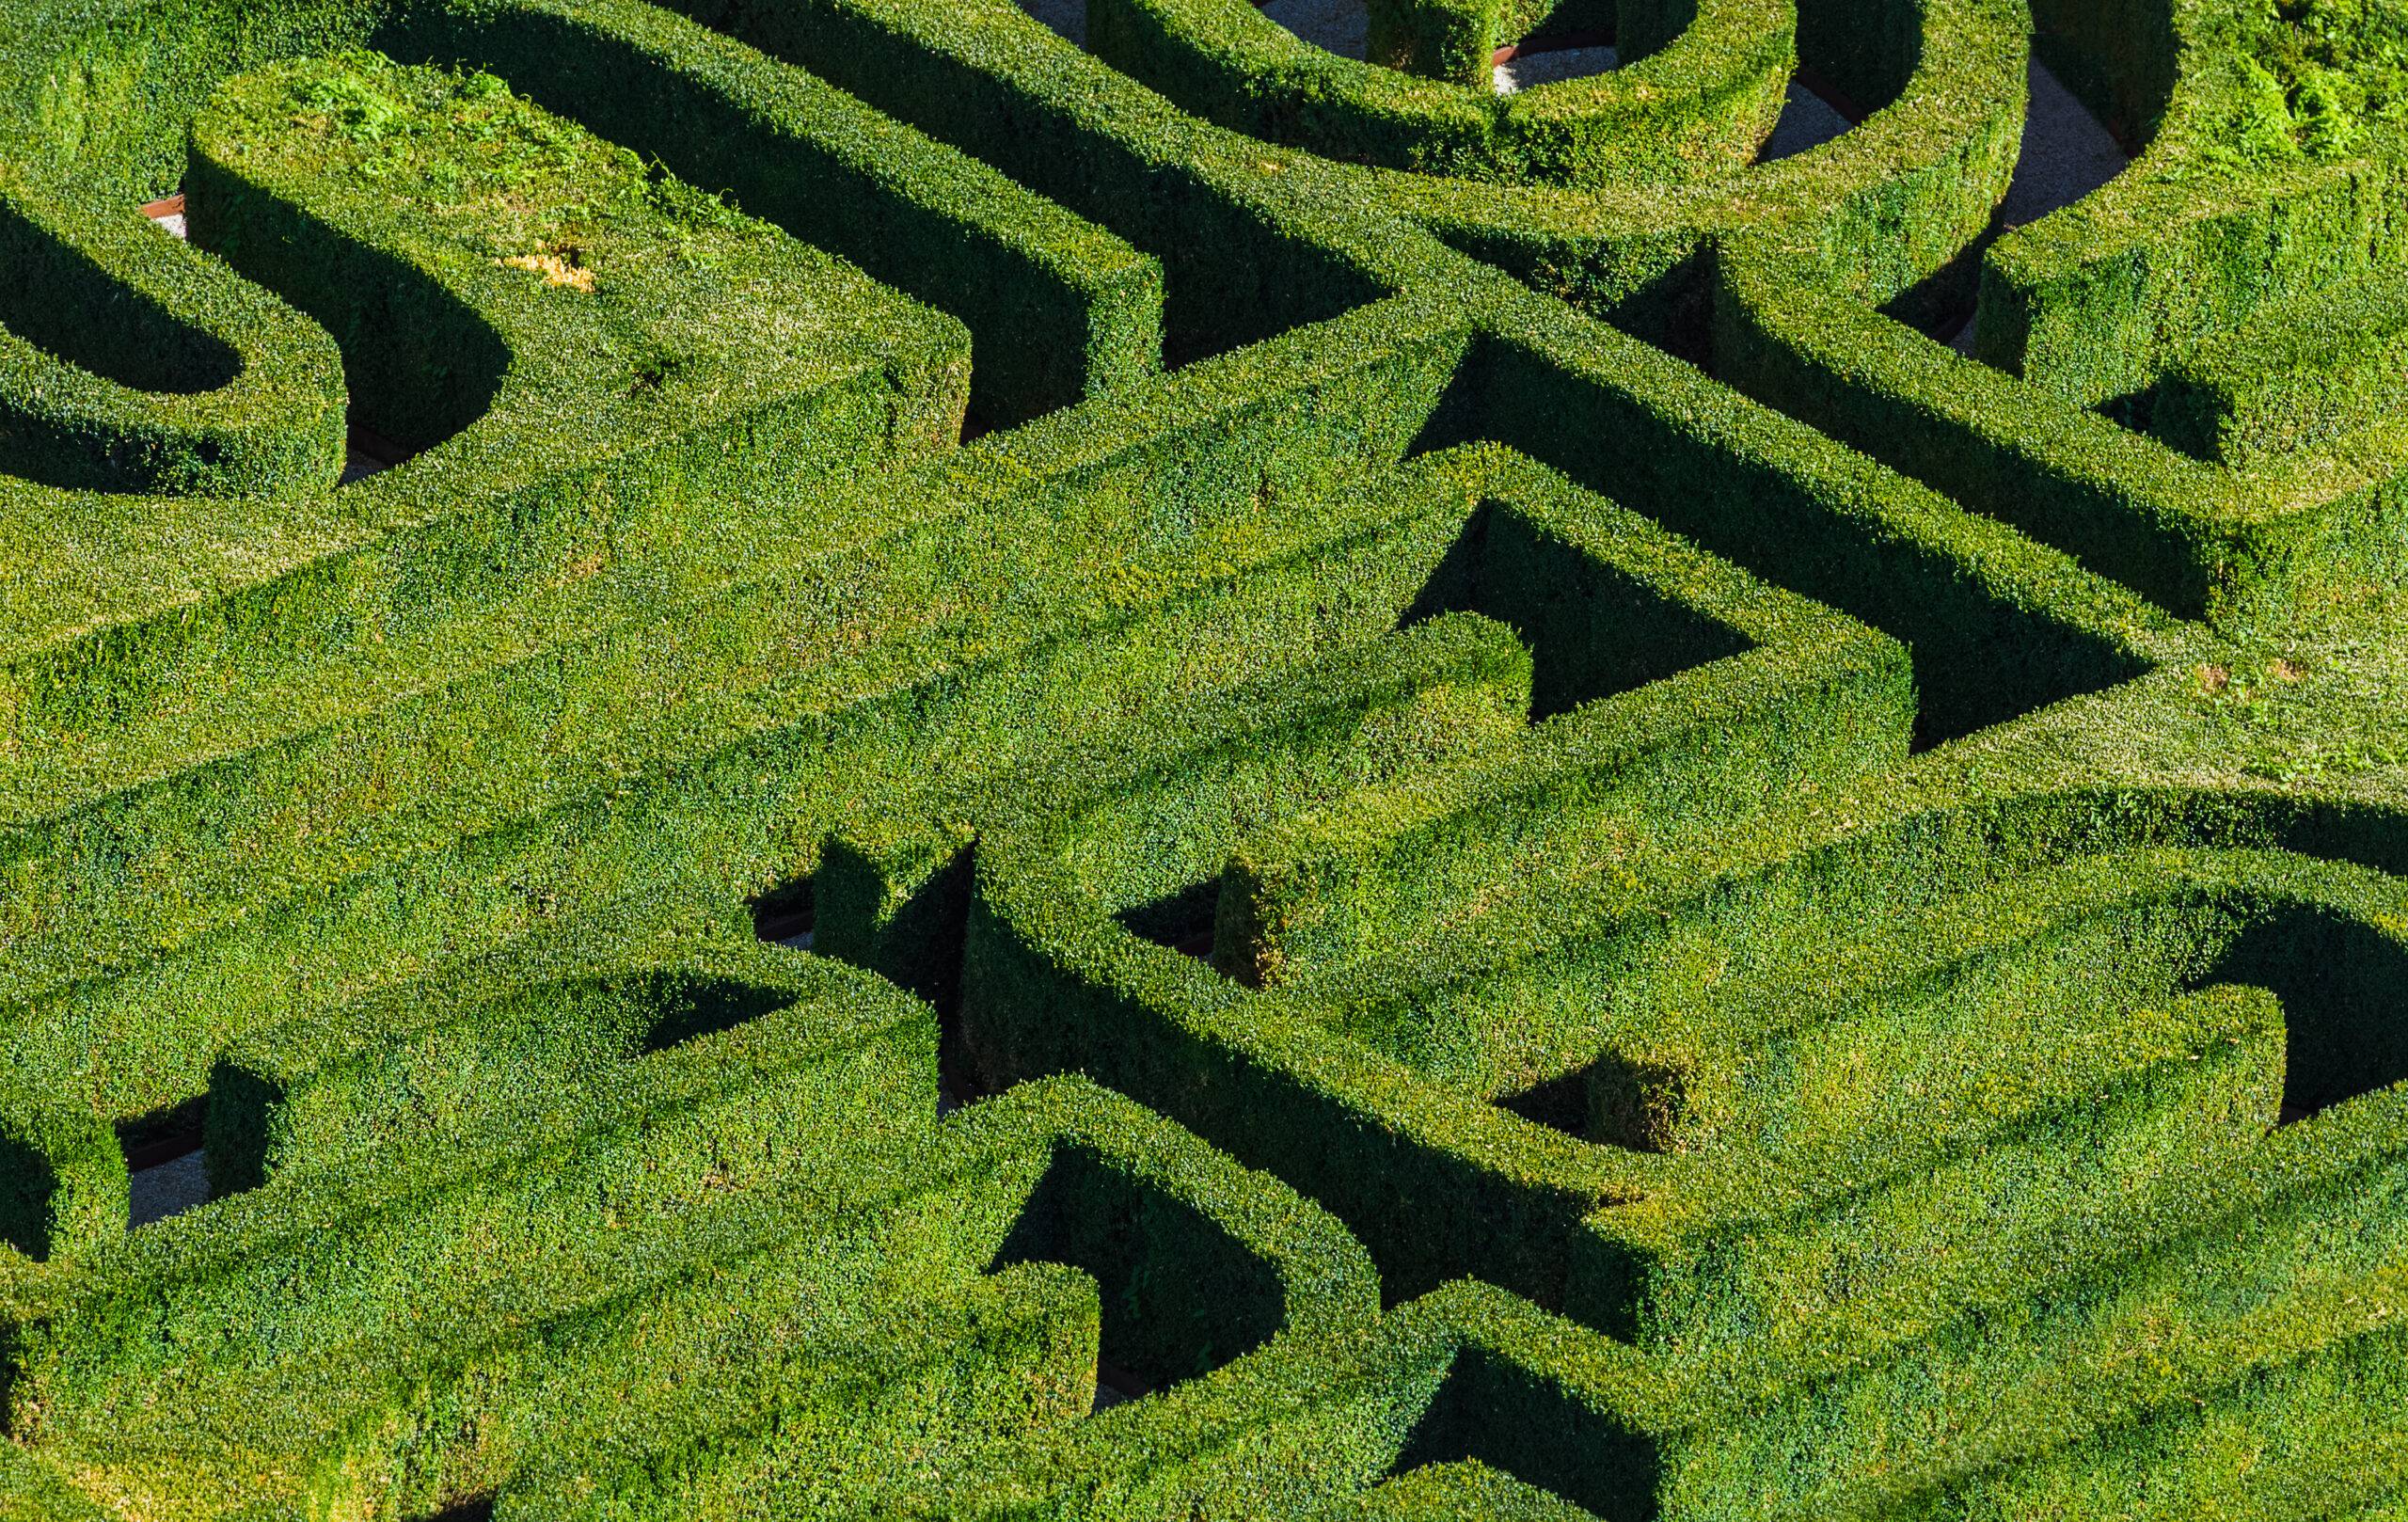 Maze in Venice Italy - nature background